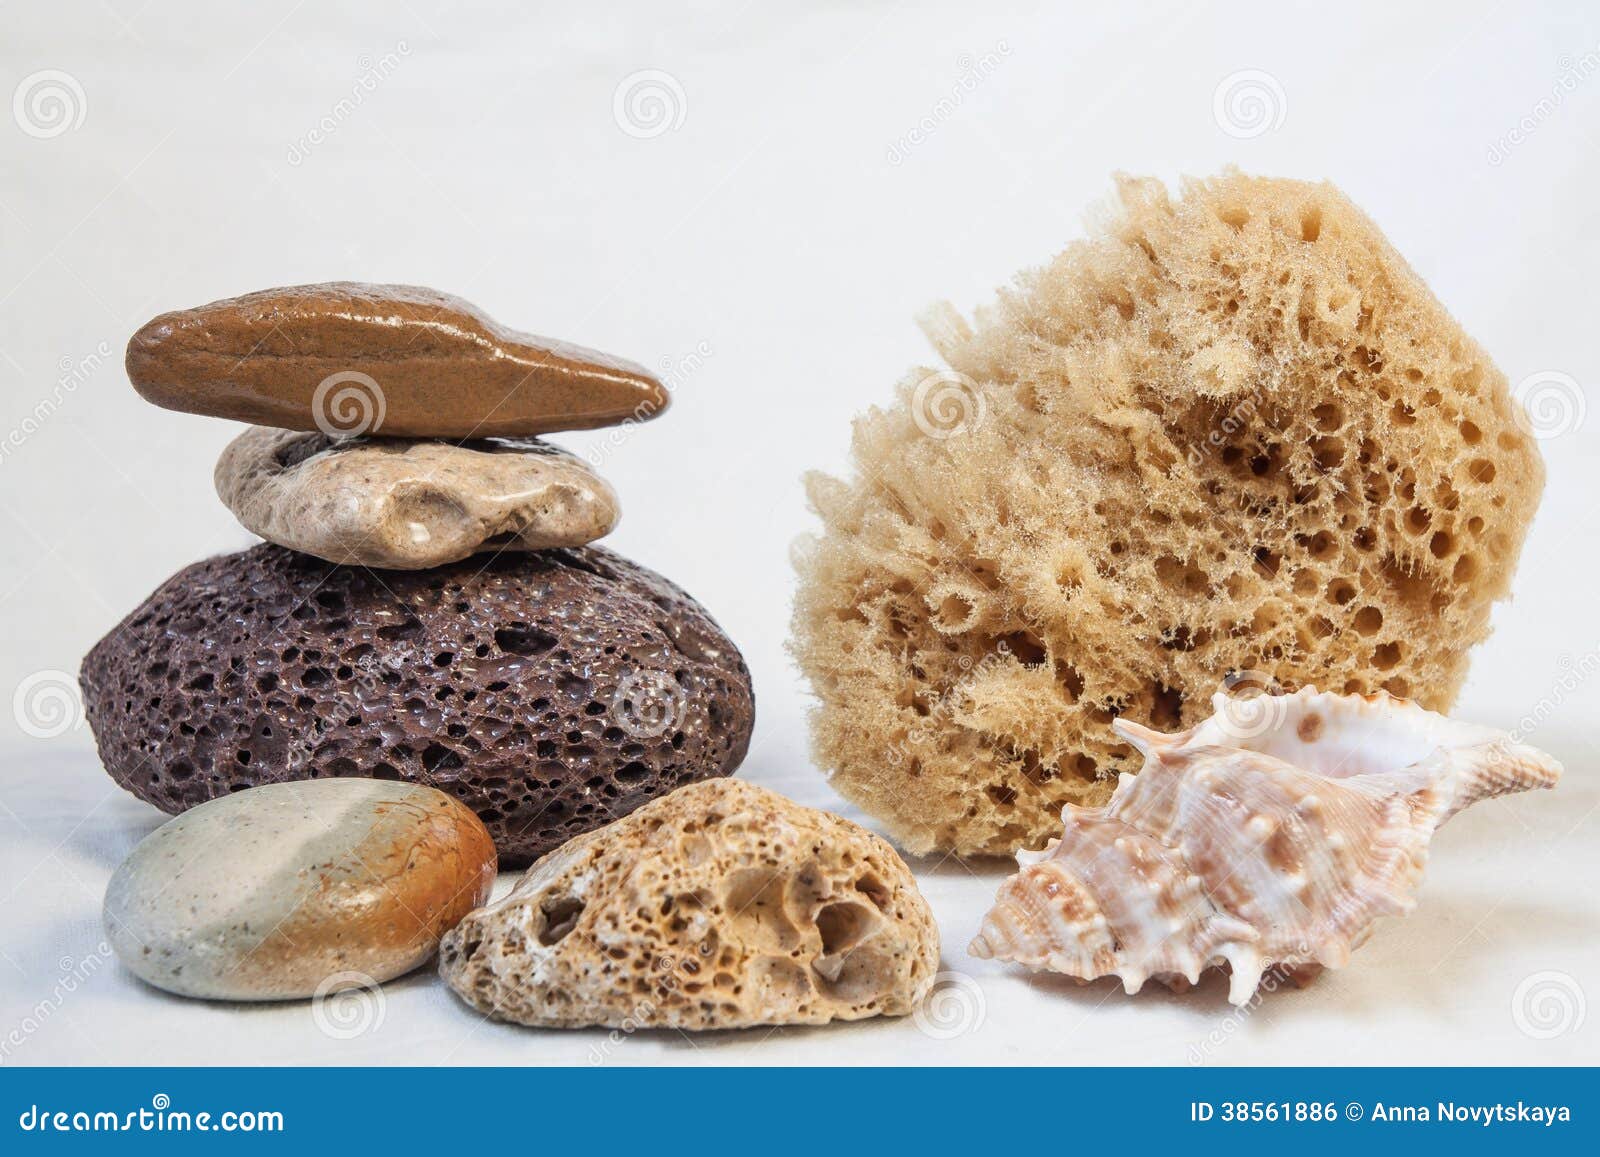 Sponge Brushes And Pumice Stone High-Res Stock Photo - Getty Images